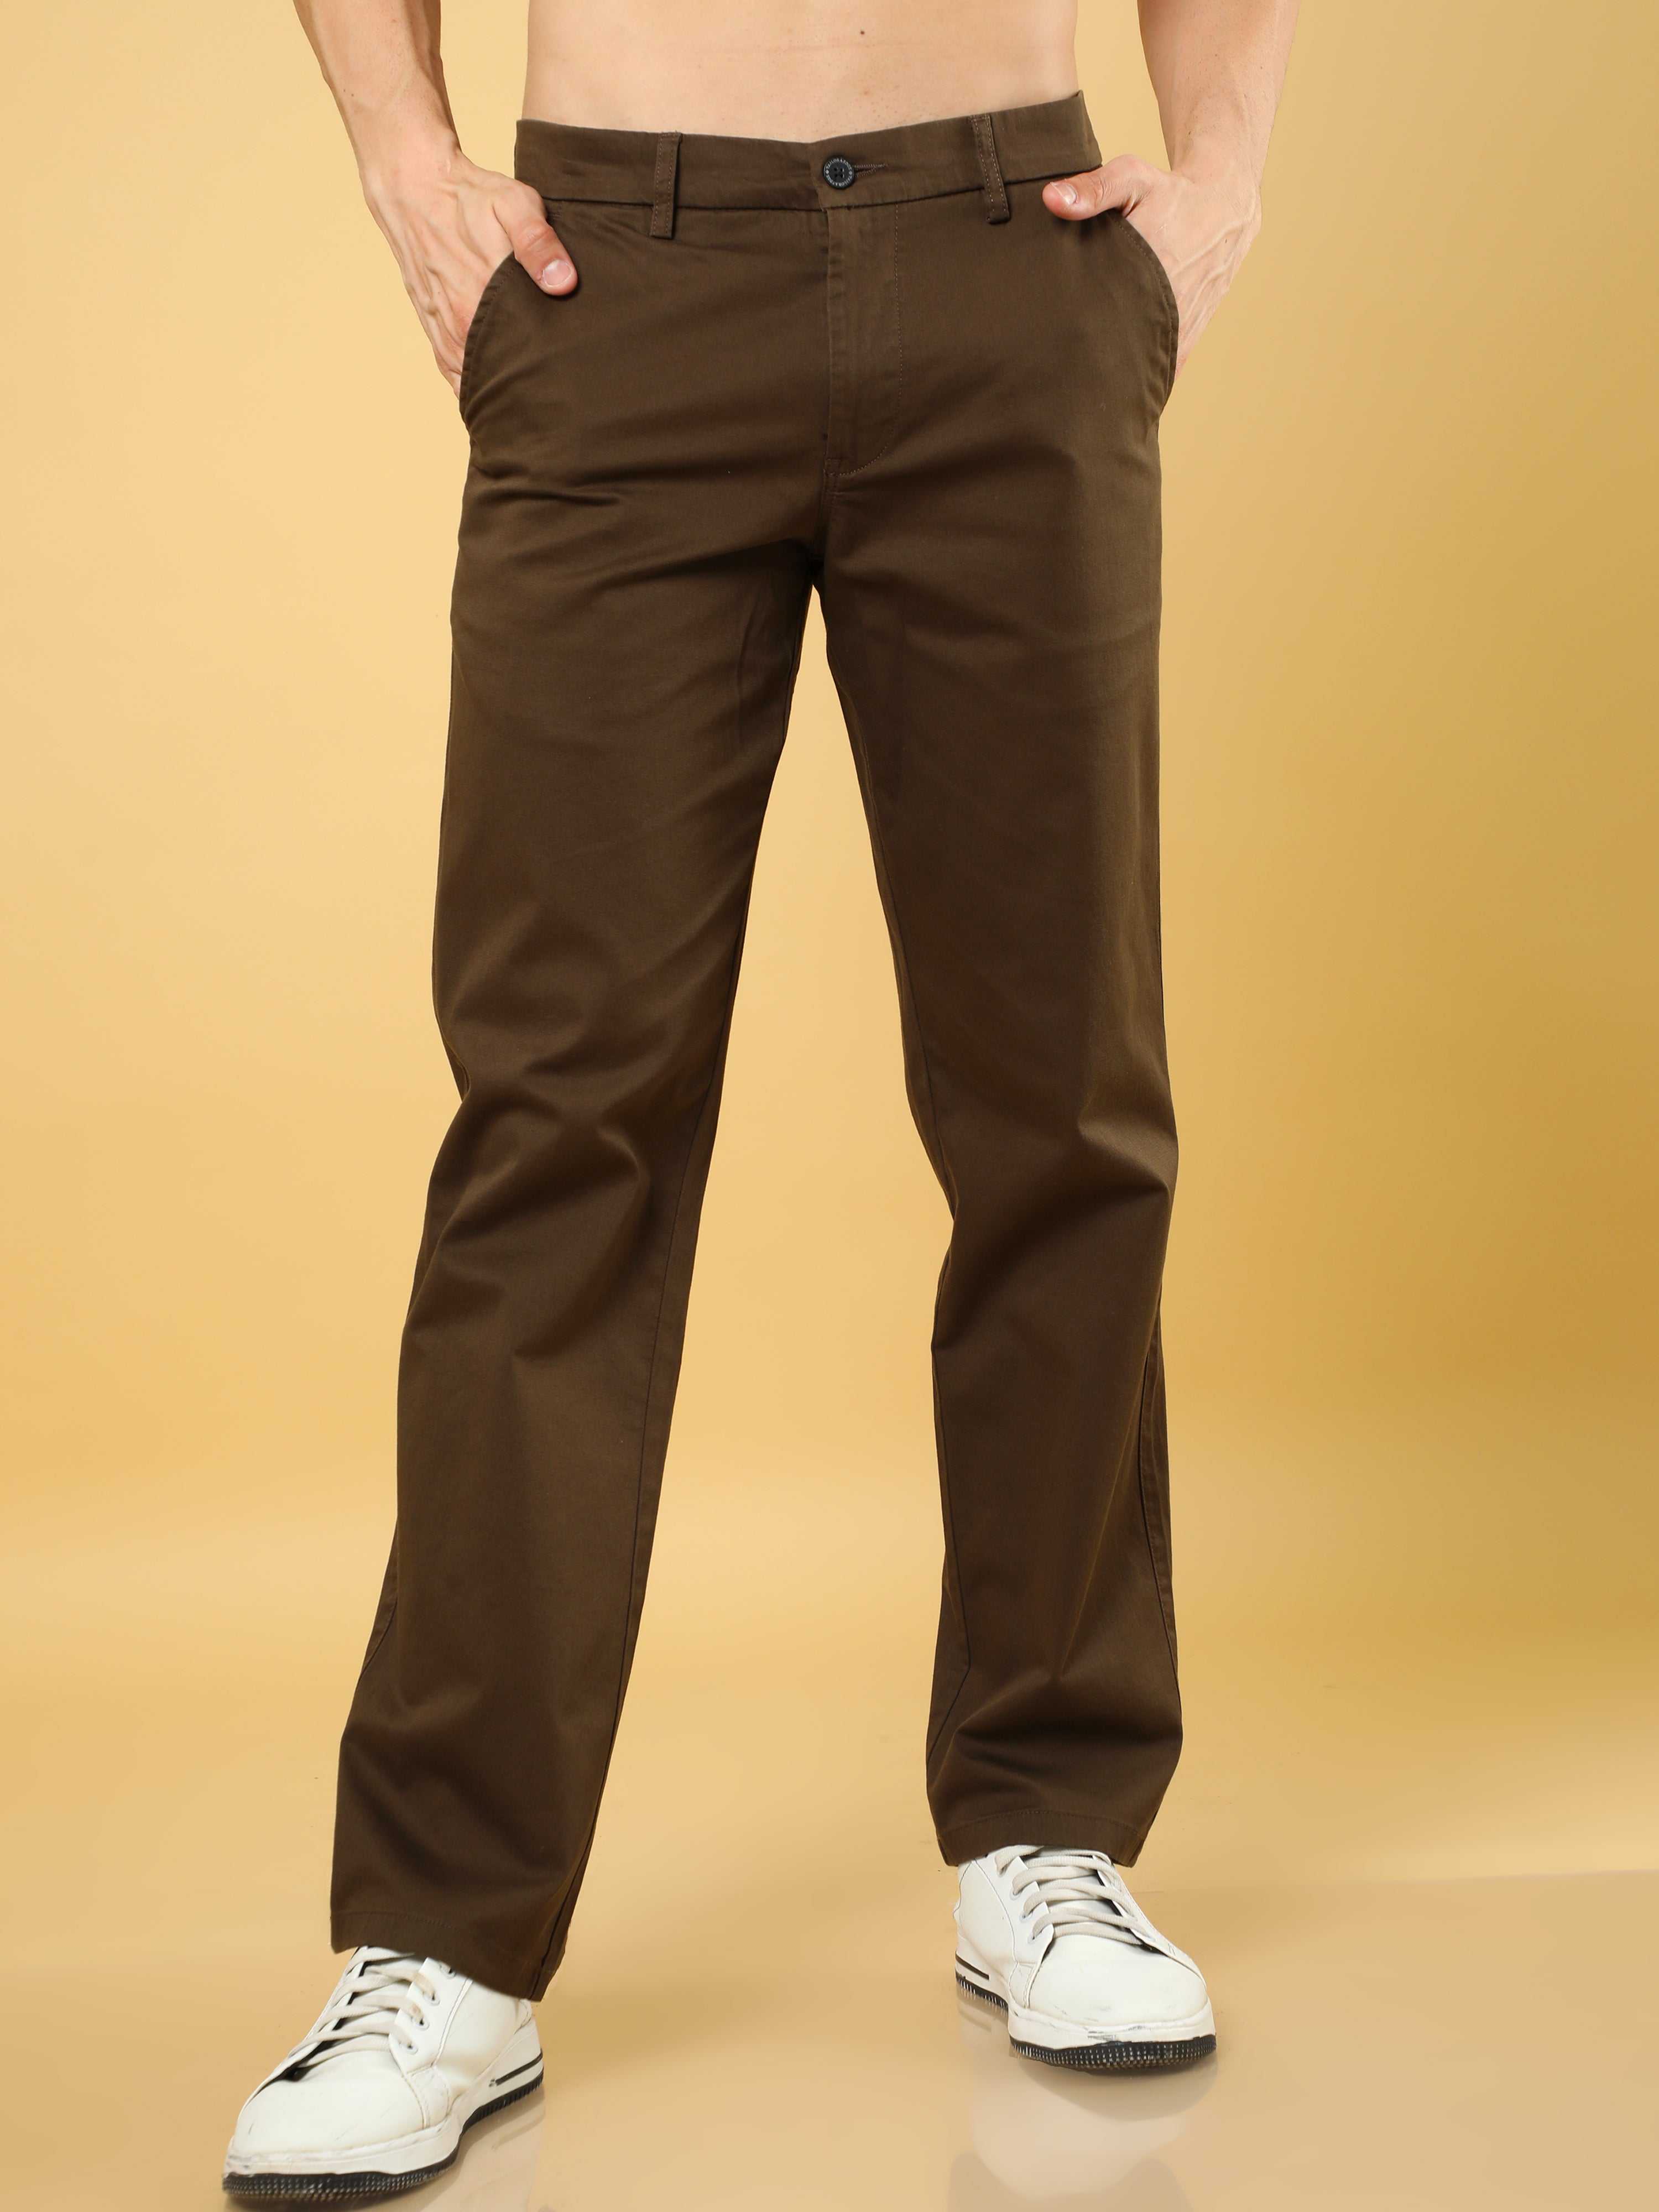 H&M Relaxed Fit Chinos | Hamilton Place